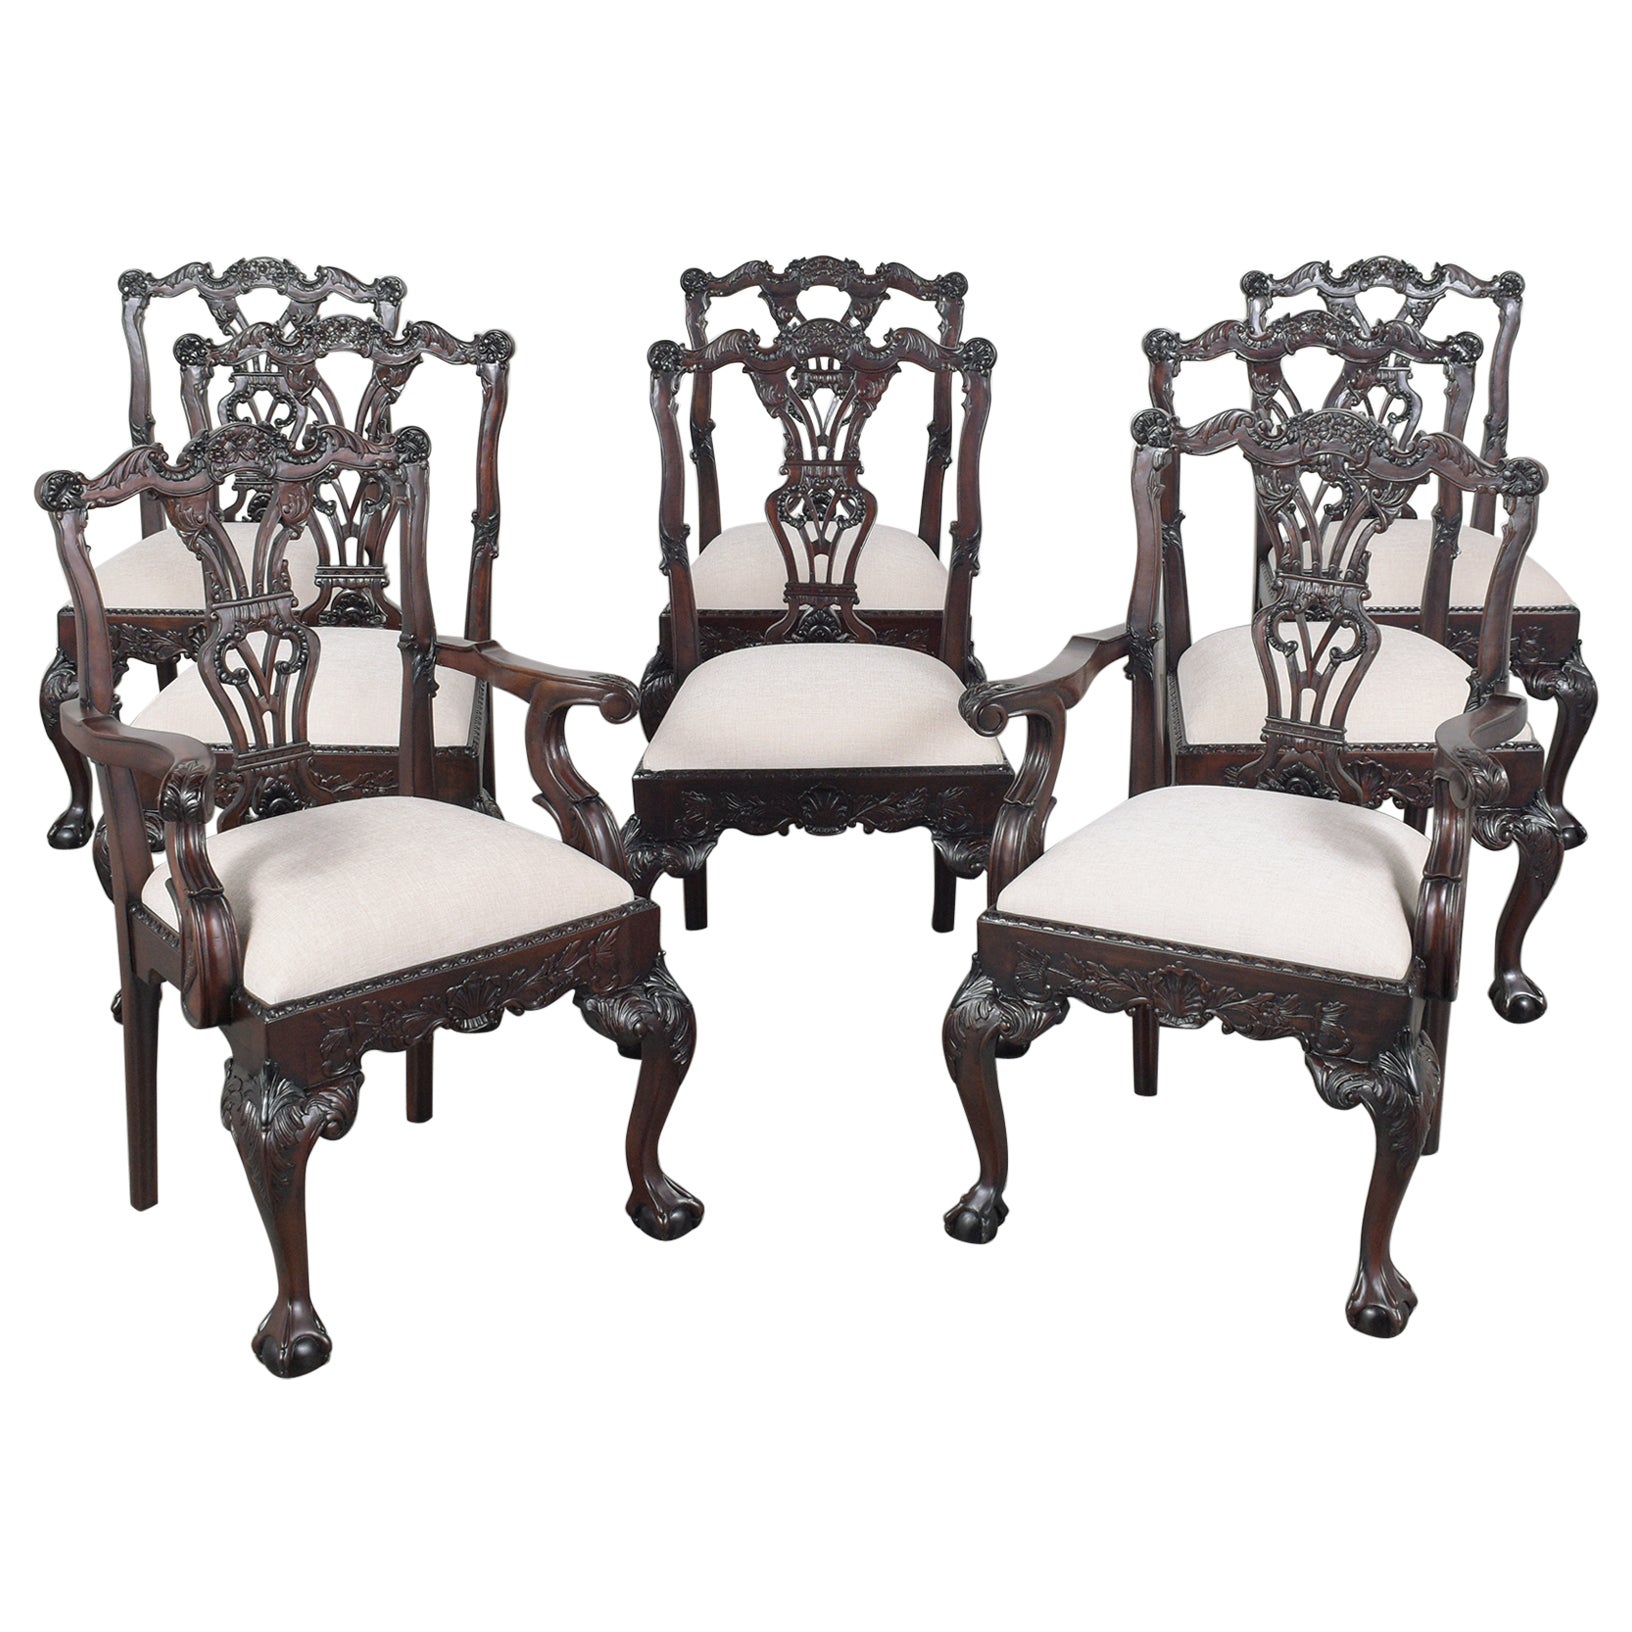 Set of 8 Restored Chippendale-Style Mahogany Dining Chairs with Ivory Upholstery